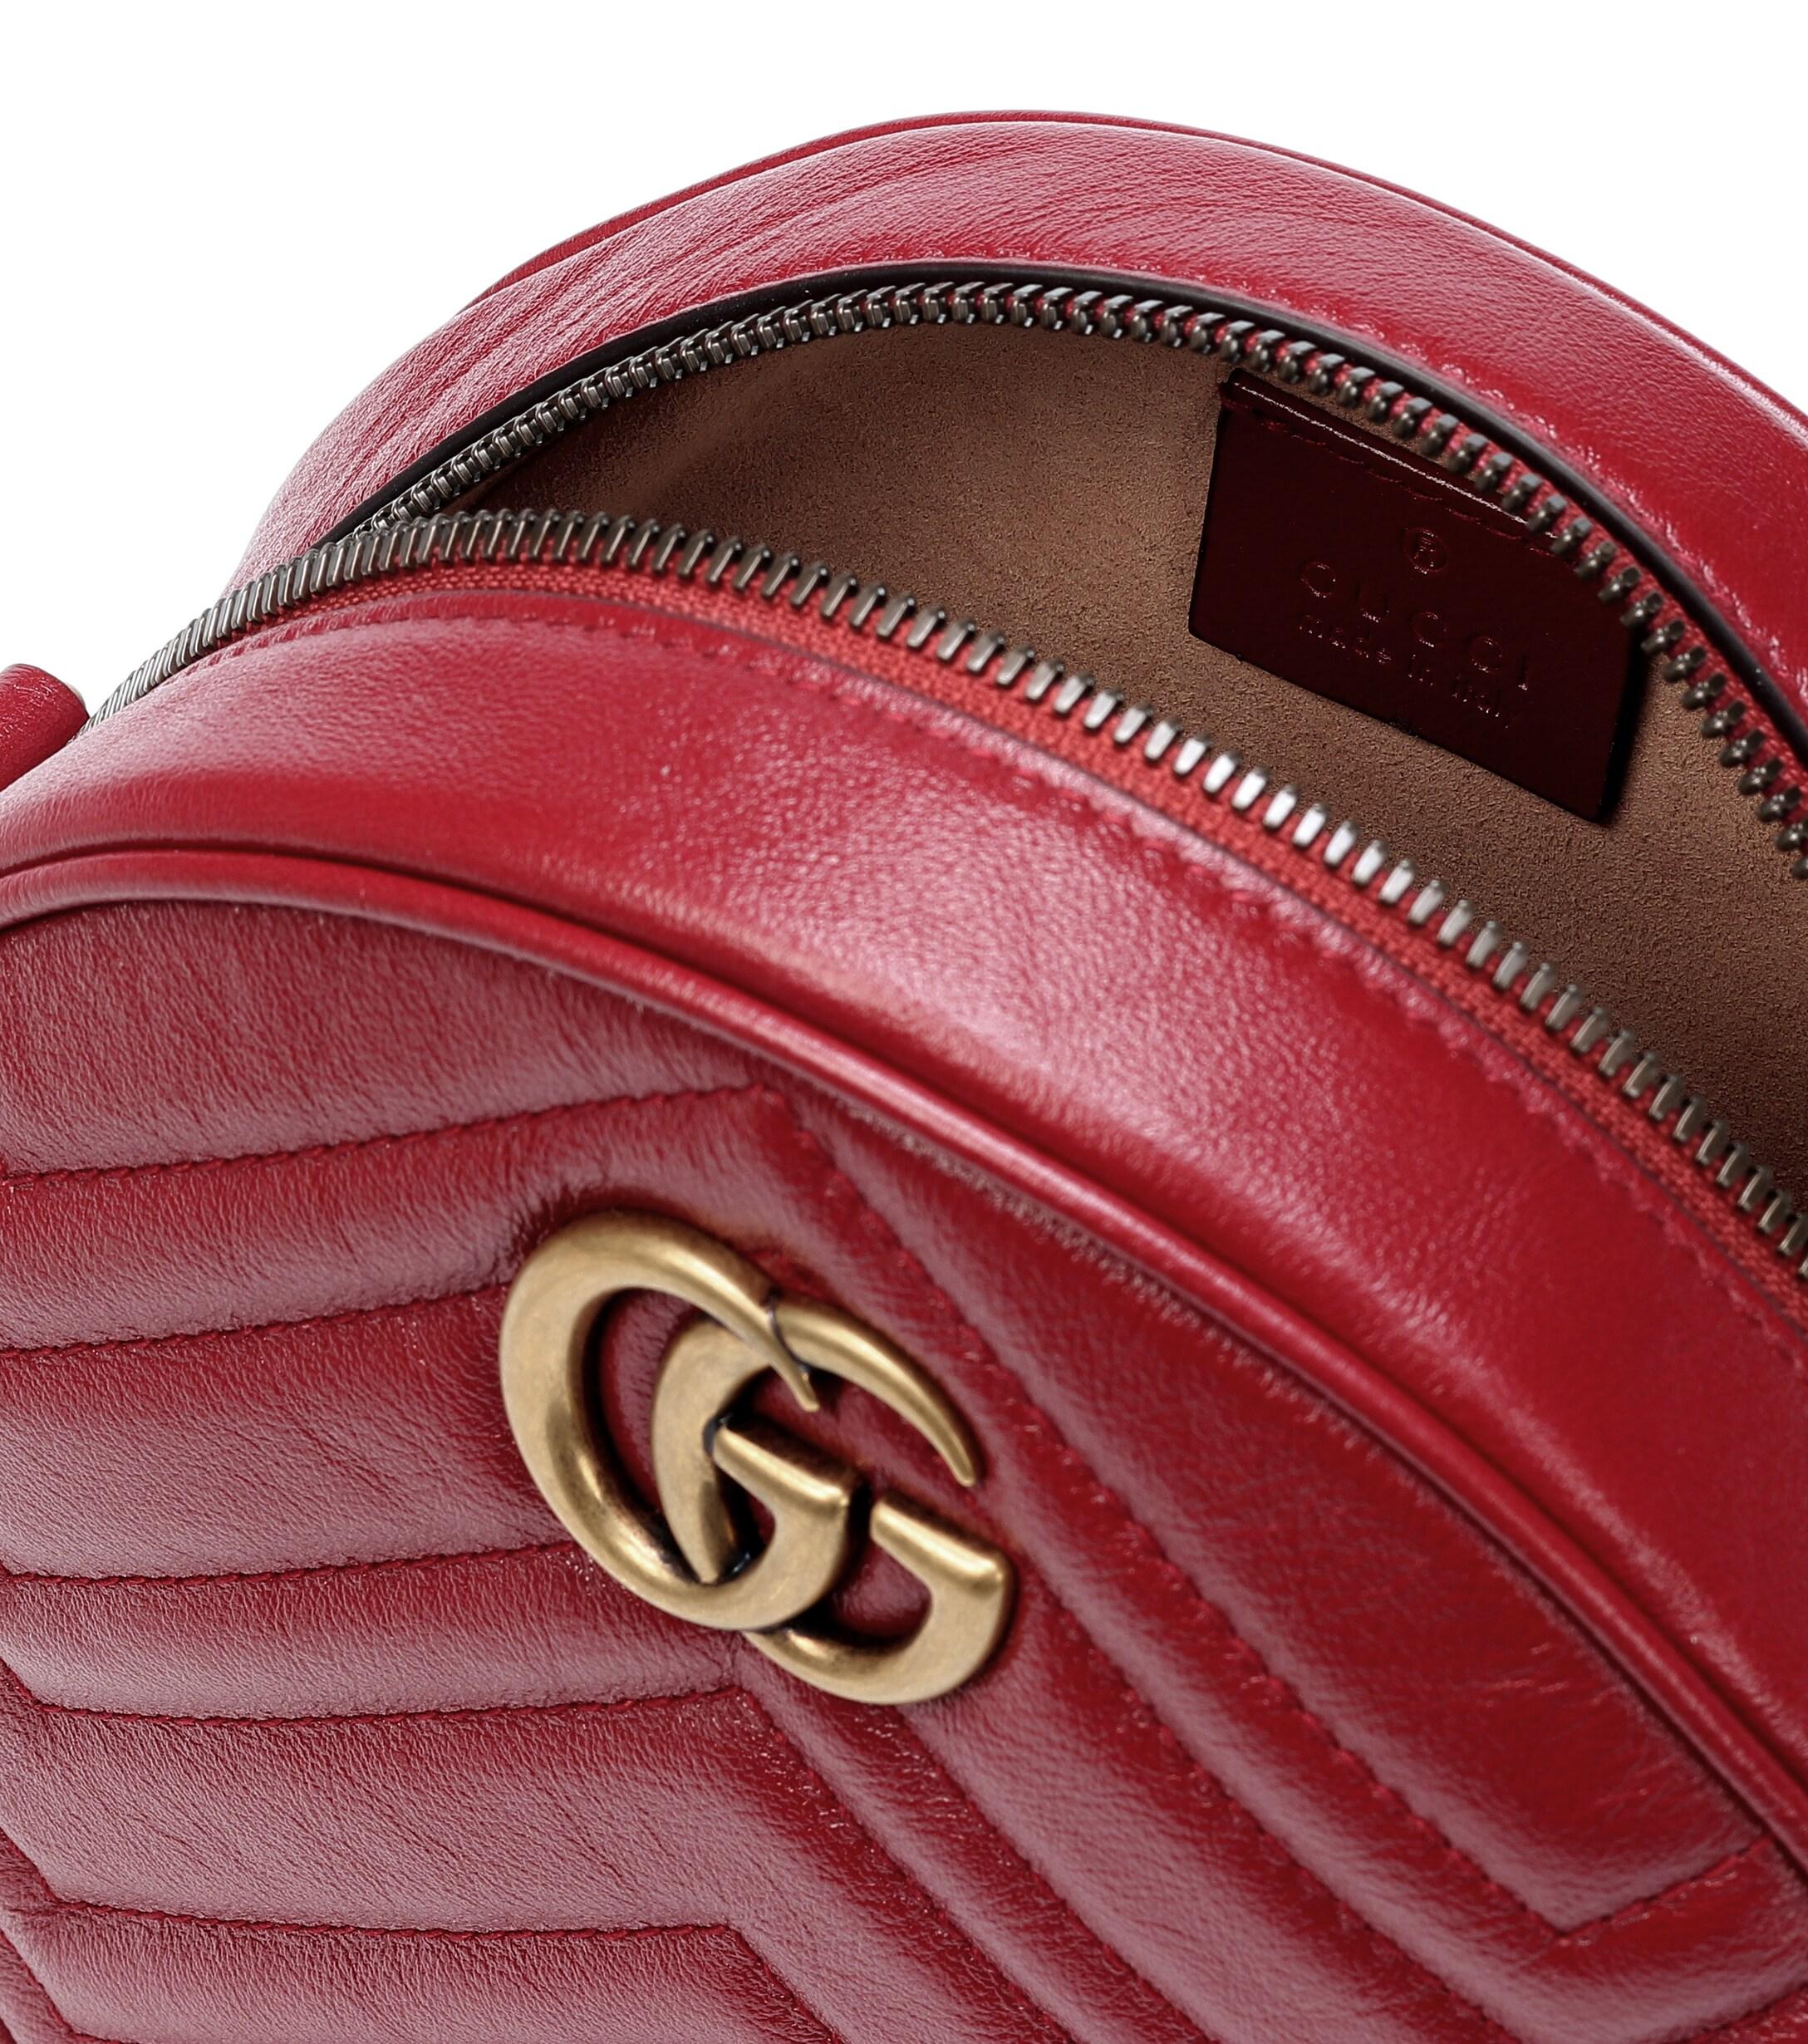 Gucci GG Marmont Mini Leather Crossbody Bag in Red - Lyst